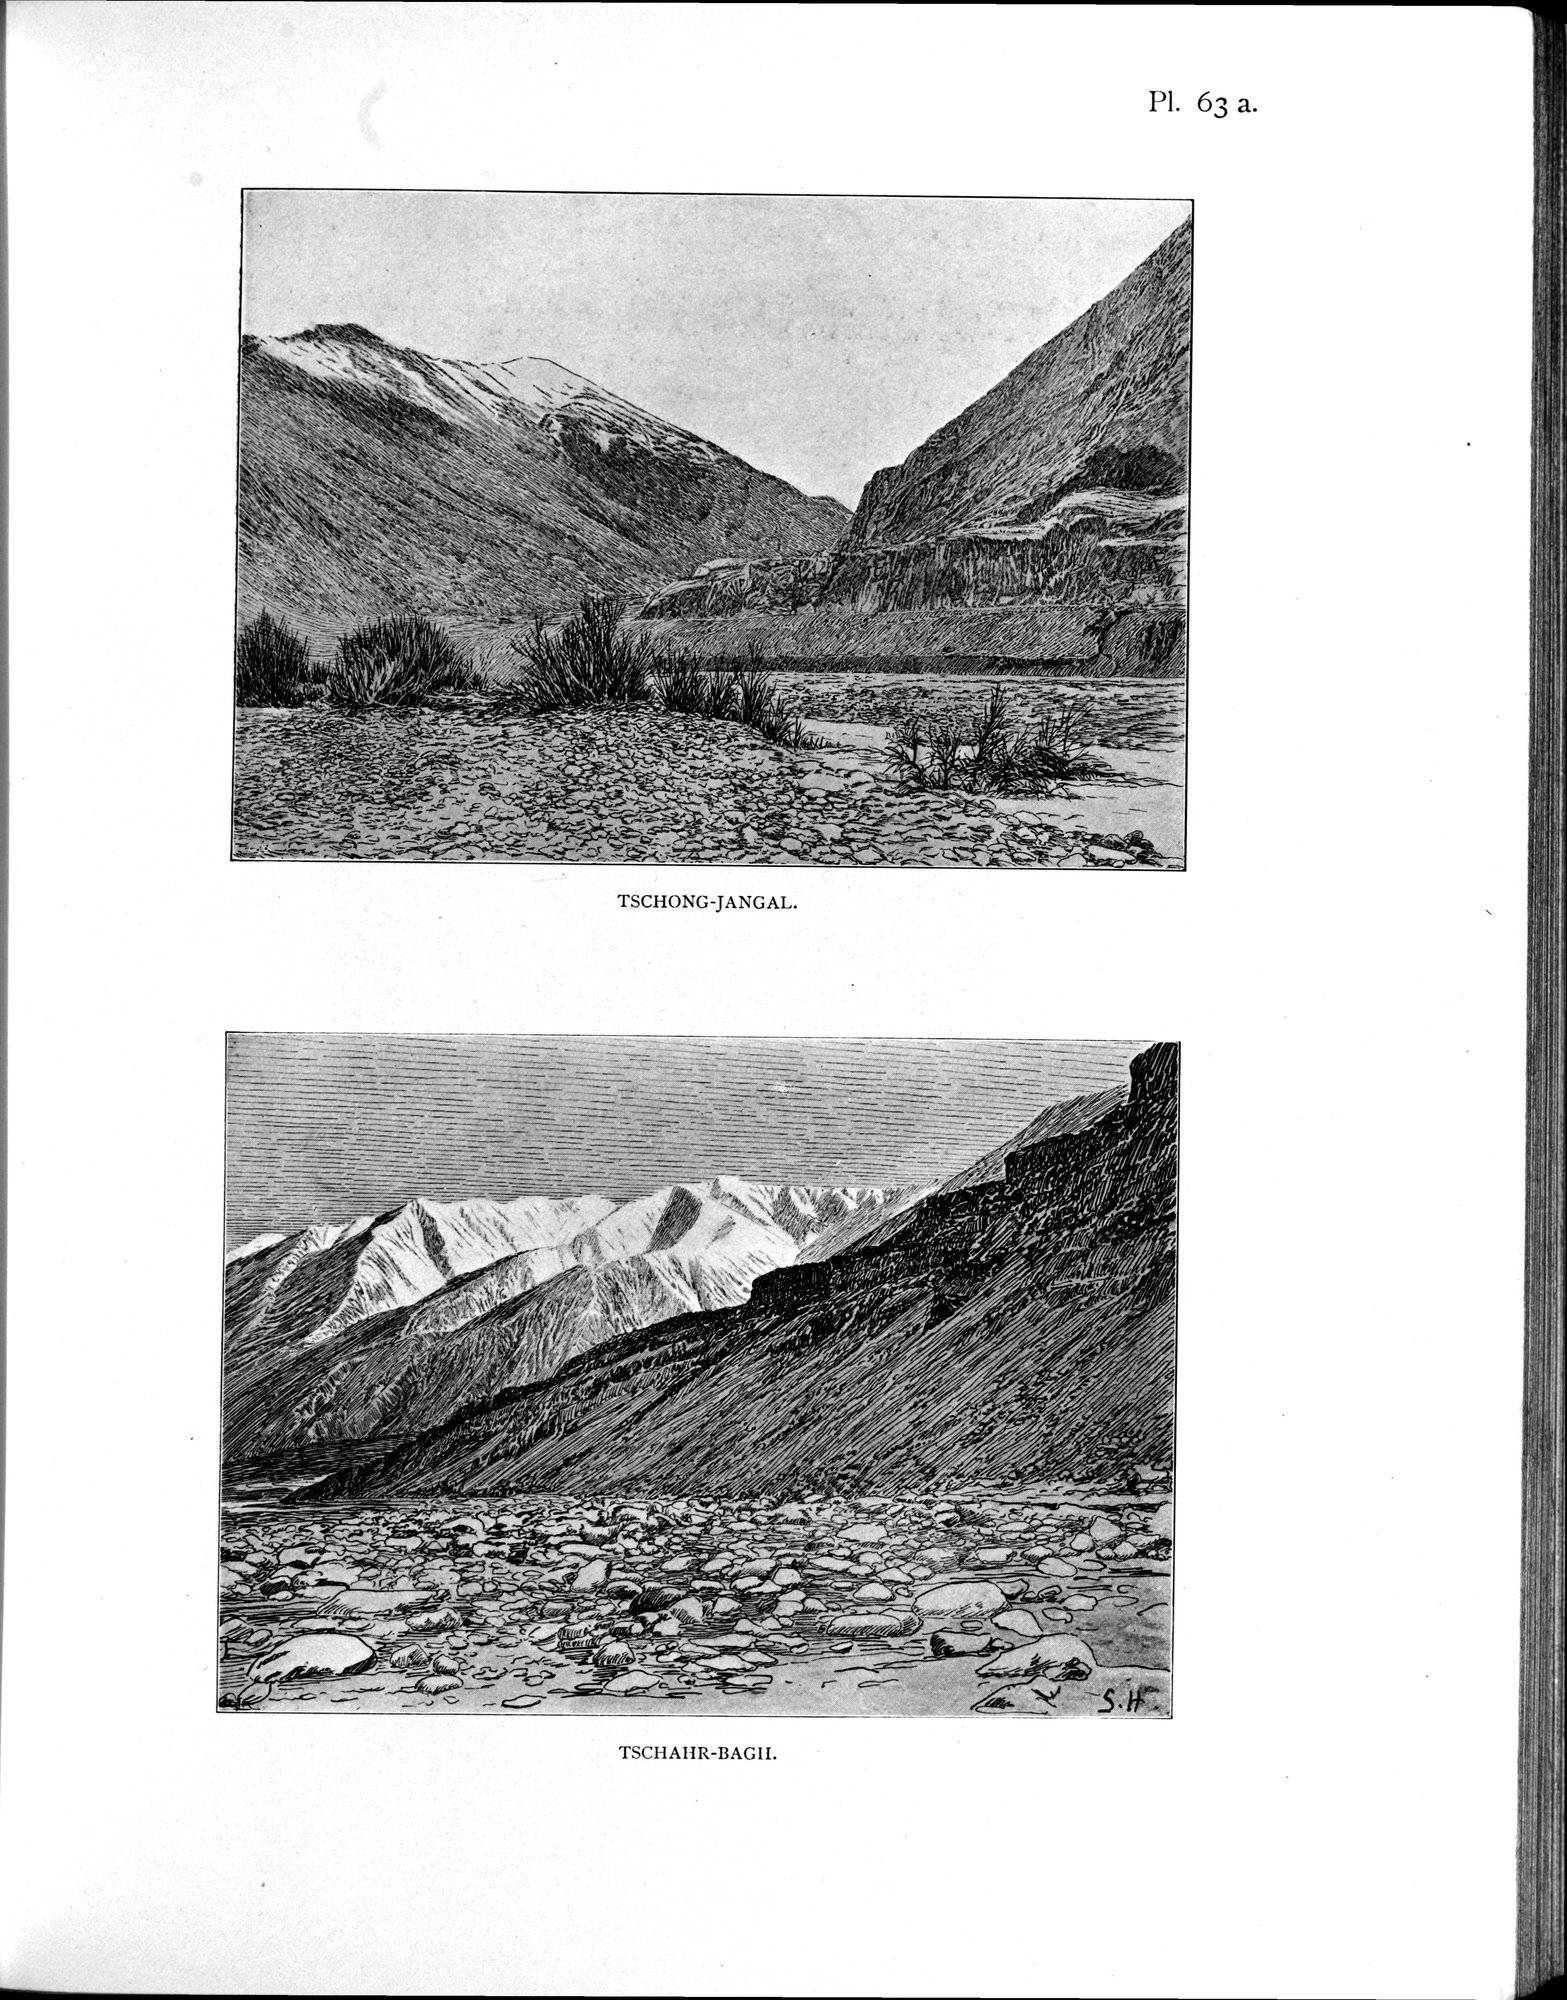 Scientific Results of a Journey in Central Asia, 1899-1902 : vol.4 / 575 ページ（白黒高解像度画像）